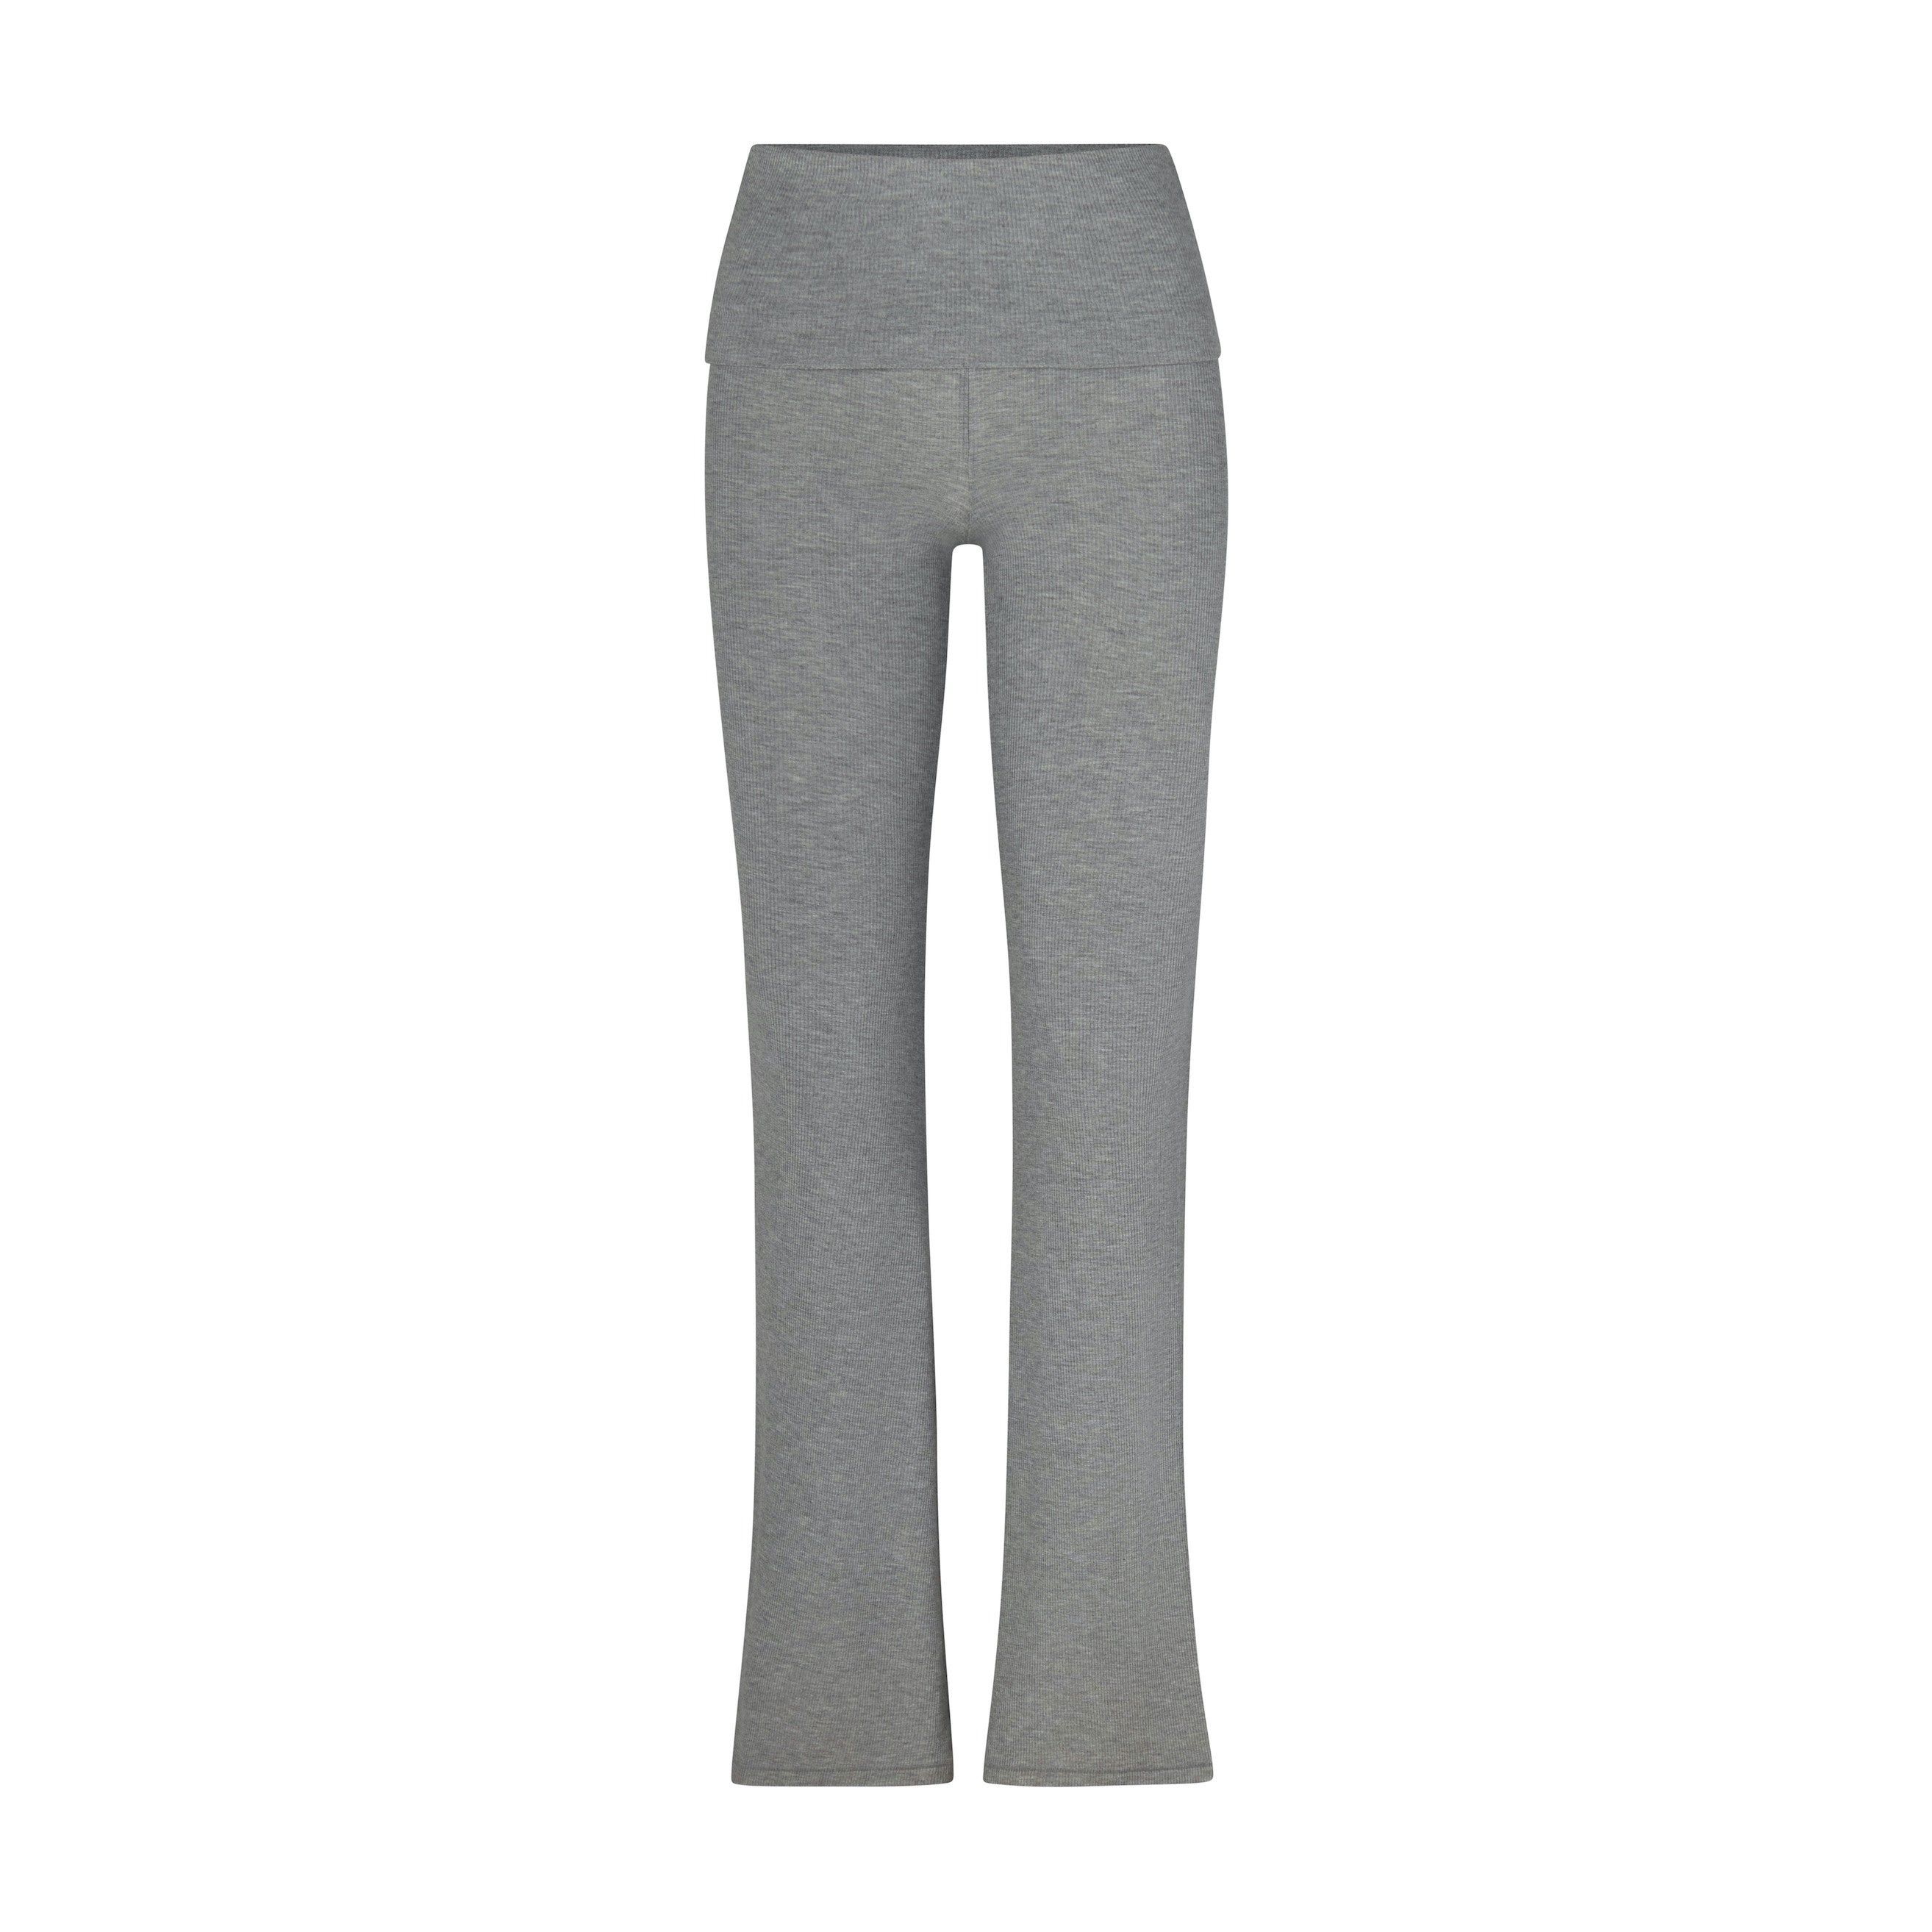 Forever 21 Fold Over Yoga Pants $13 | Fold over yoga pants, Clothes, Pants